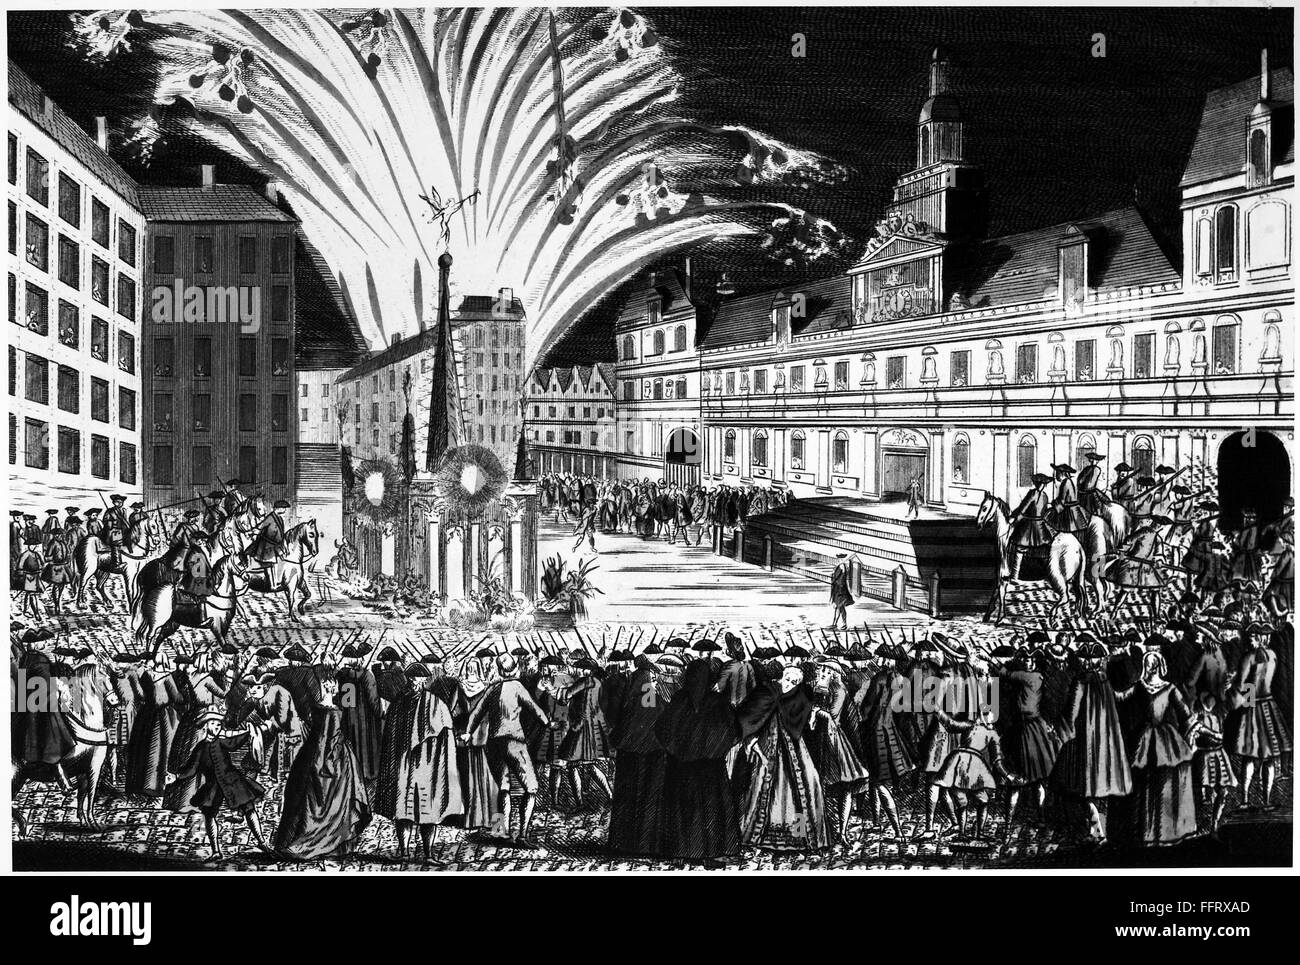 TREATY OF PARIS, 1763. /nFireworks at H⌠tel de Ville in Paris celebrating the Treaty of Paris, 10 February 1763, ending the Seven Years War between Great Britain, France and Spain. Contemporary French line engraving. Stock Photo